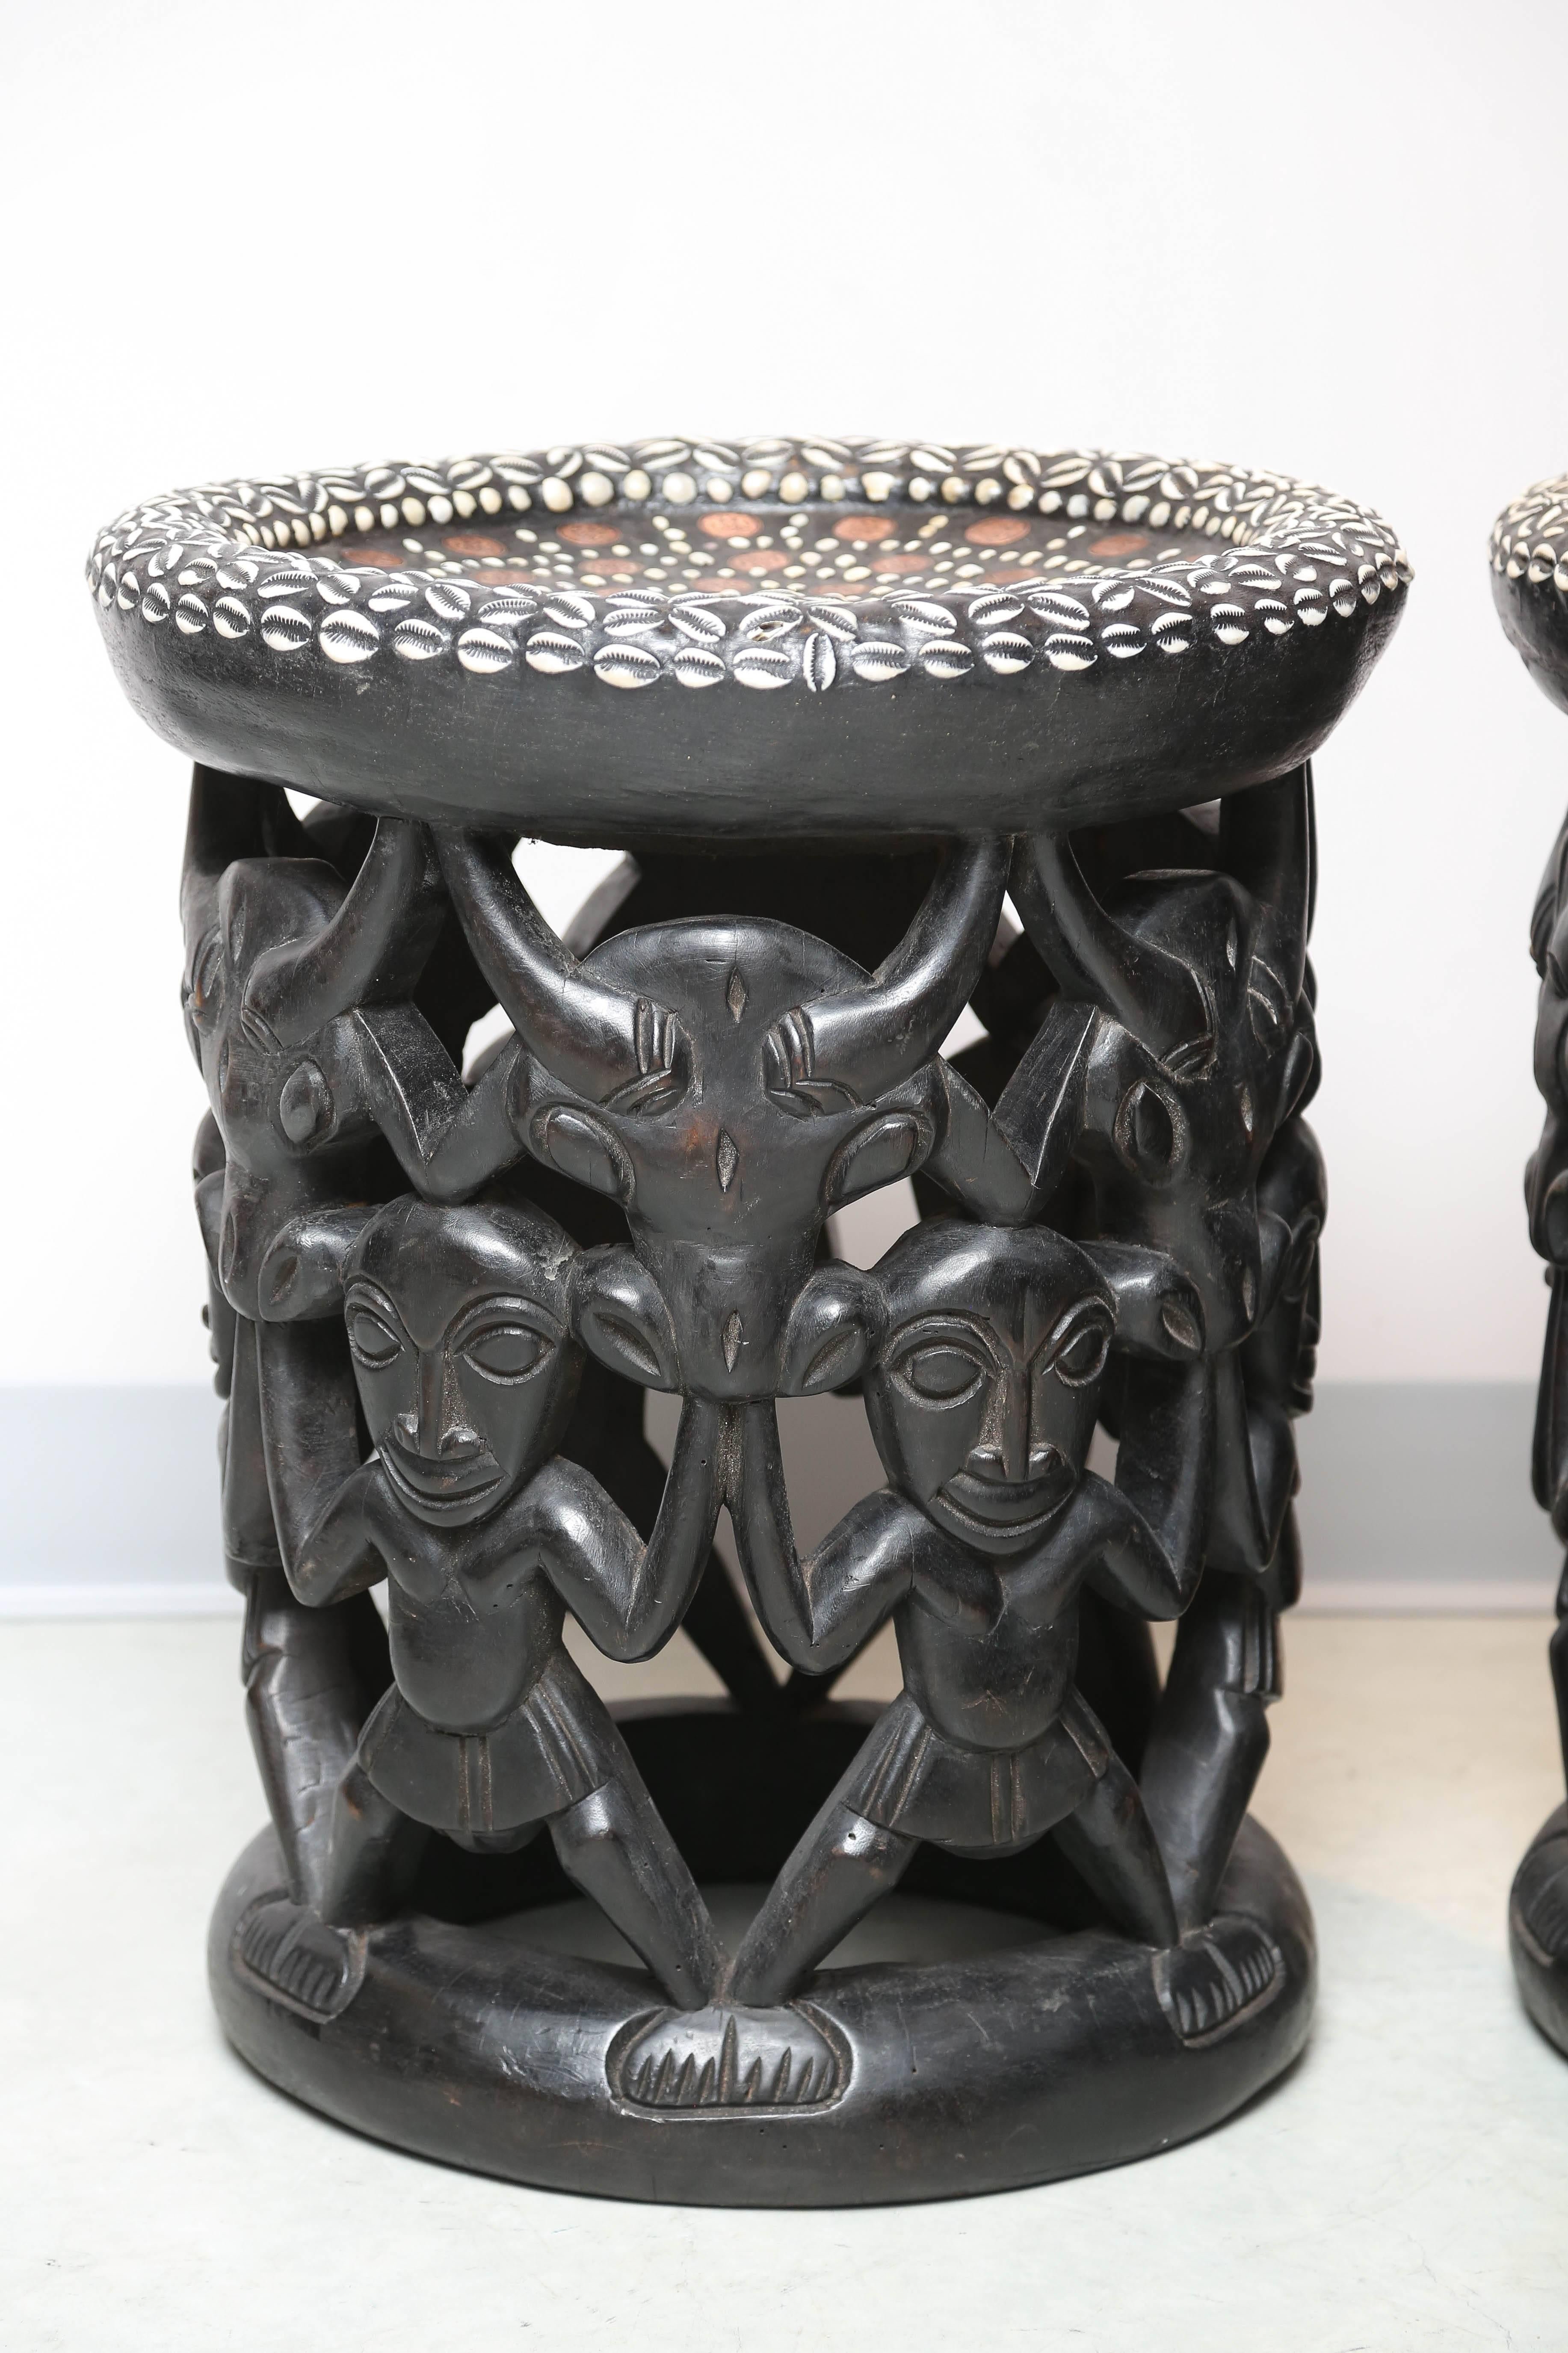 Exceptional treasure of a pair of side tables, materials render it very rich and artisan.